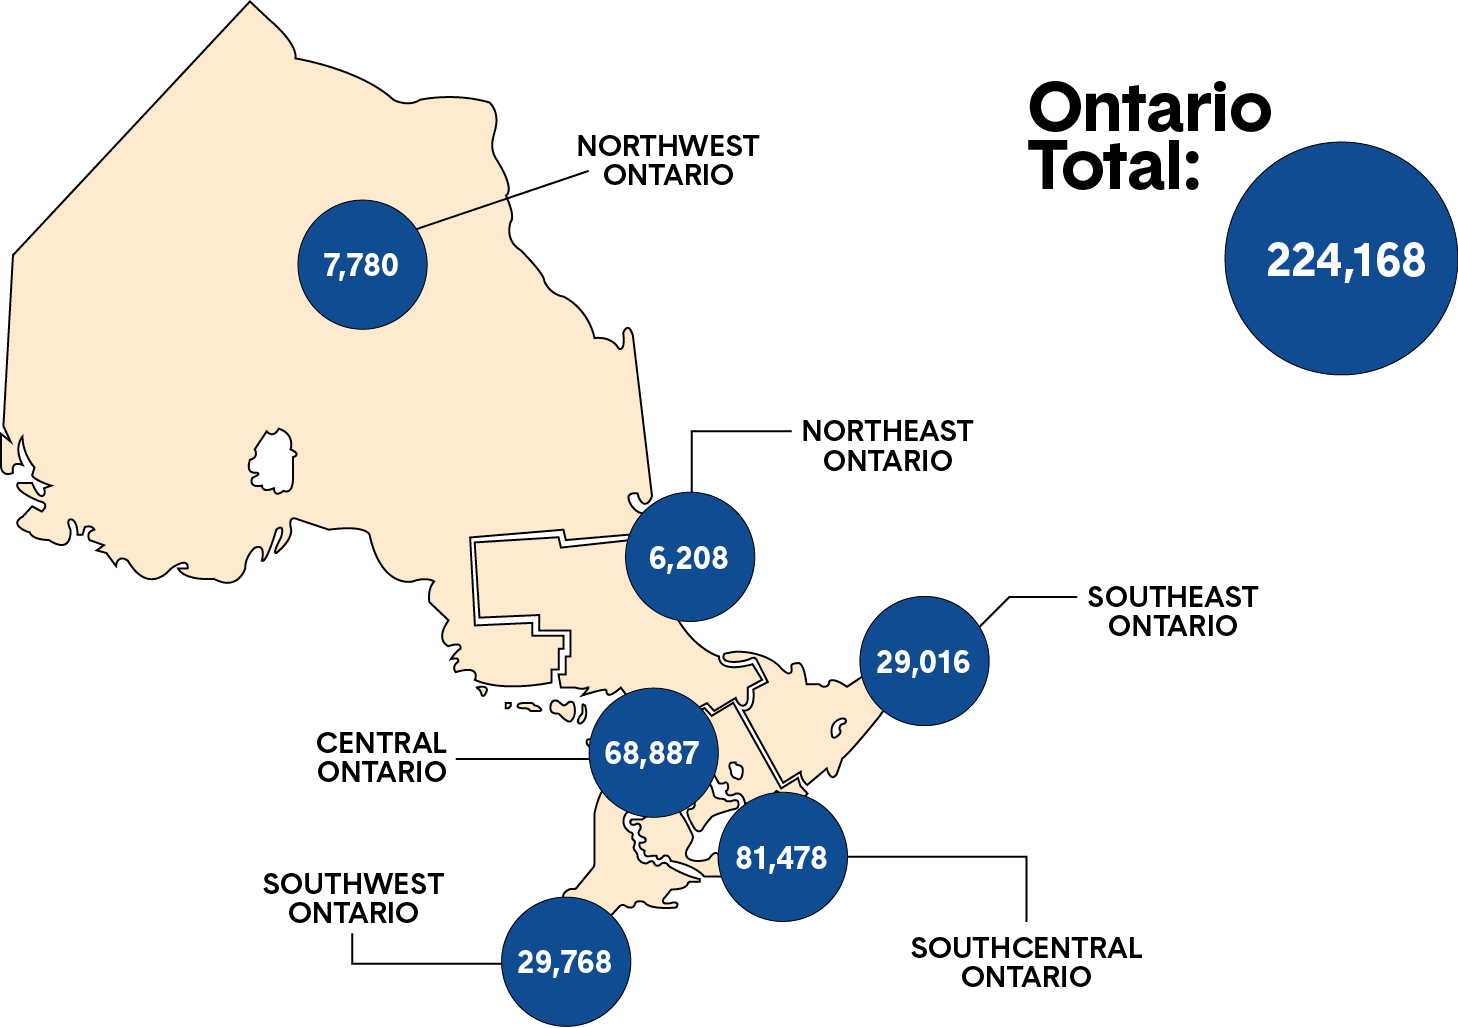 A map of Ontario shows the number of members appearing on the public register from each of Northwest Ontario, Southwest Ontario, Central Ontario, Northeast Ontario, Southcentral Ontario and Southeast Ontario. Long description follows.